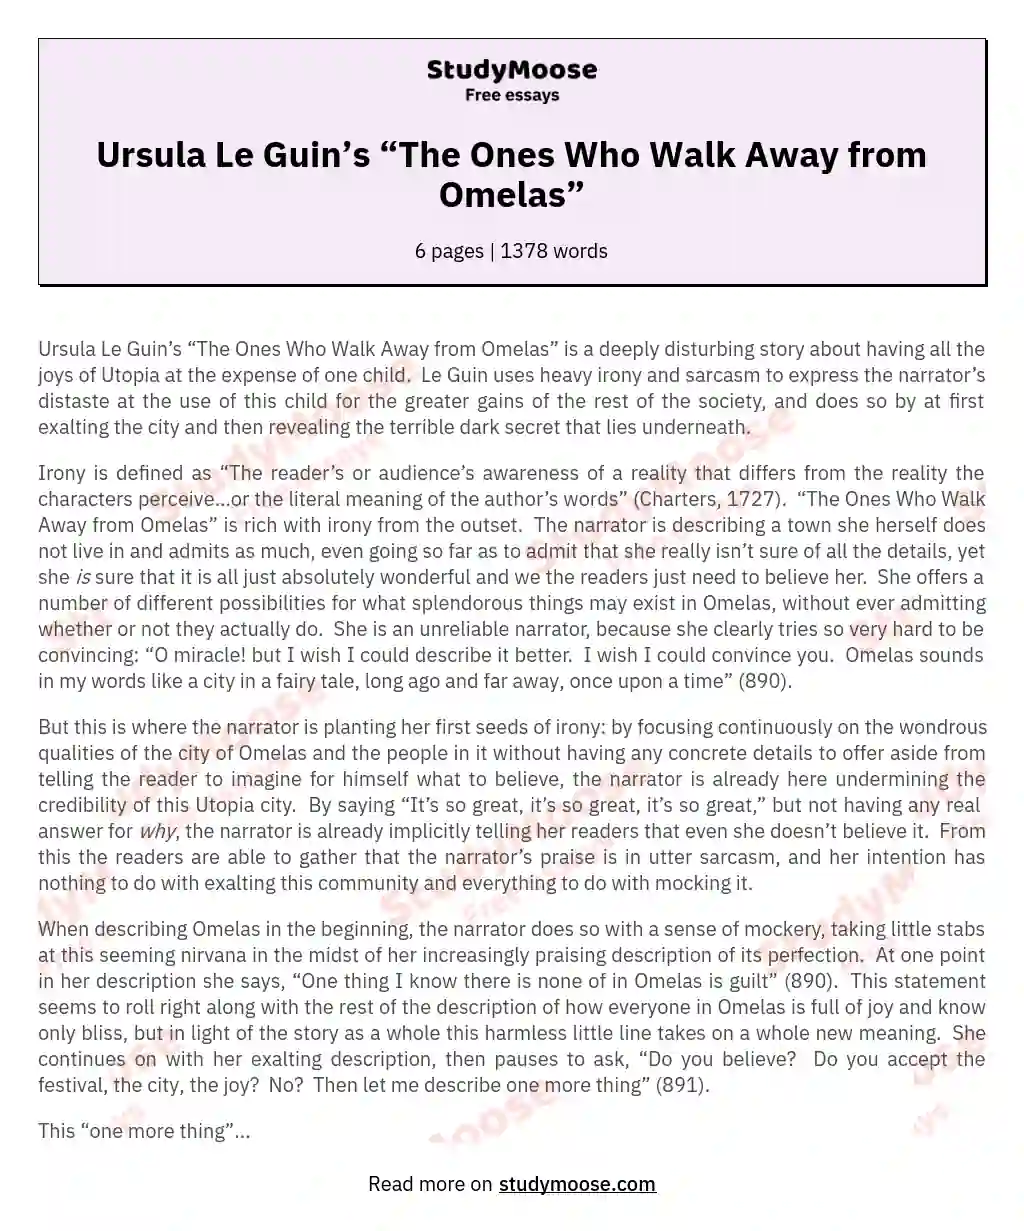 Ursula Le Guin’s “The Ones Who Walk Away from Omelas” essay